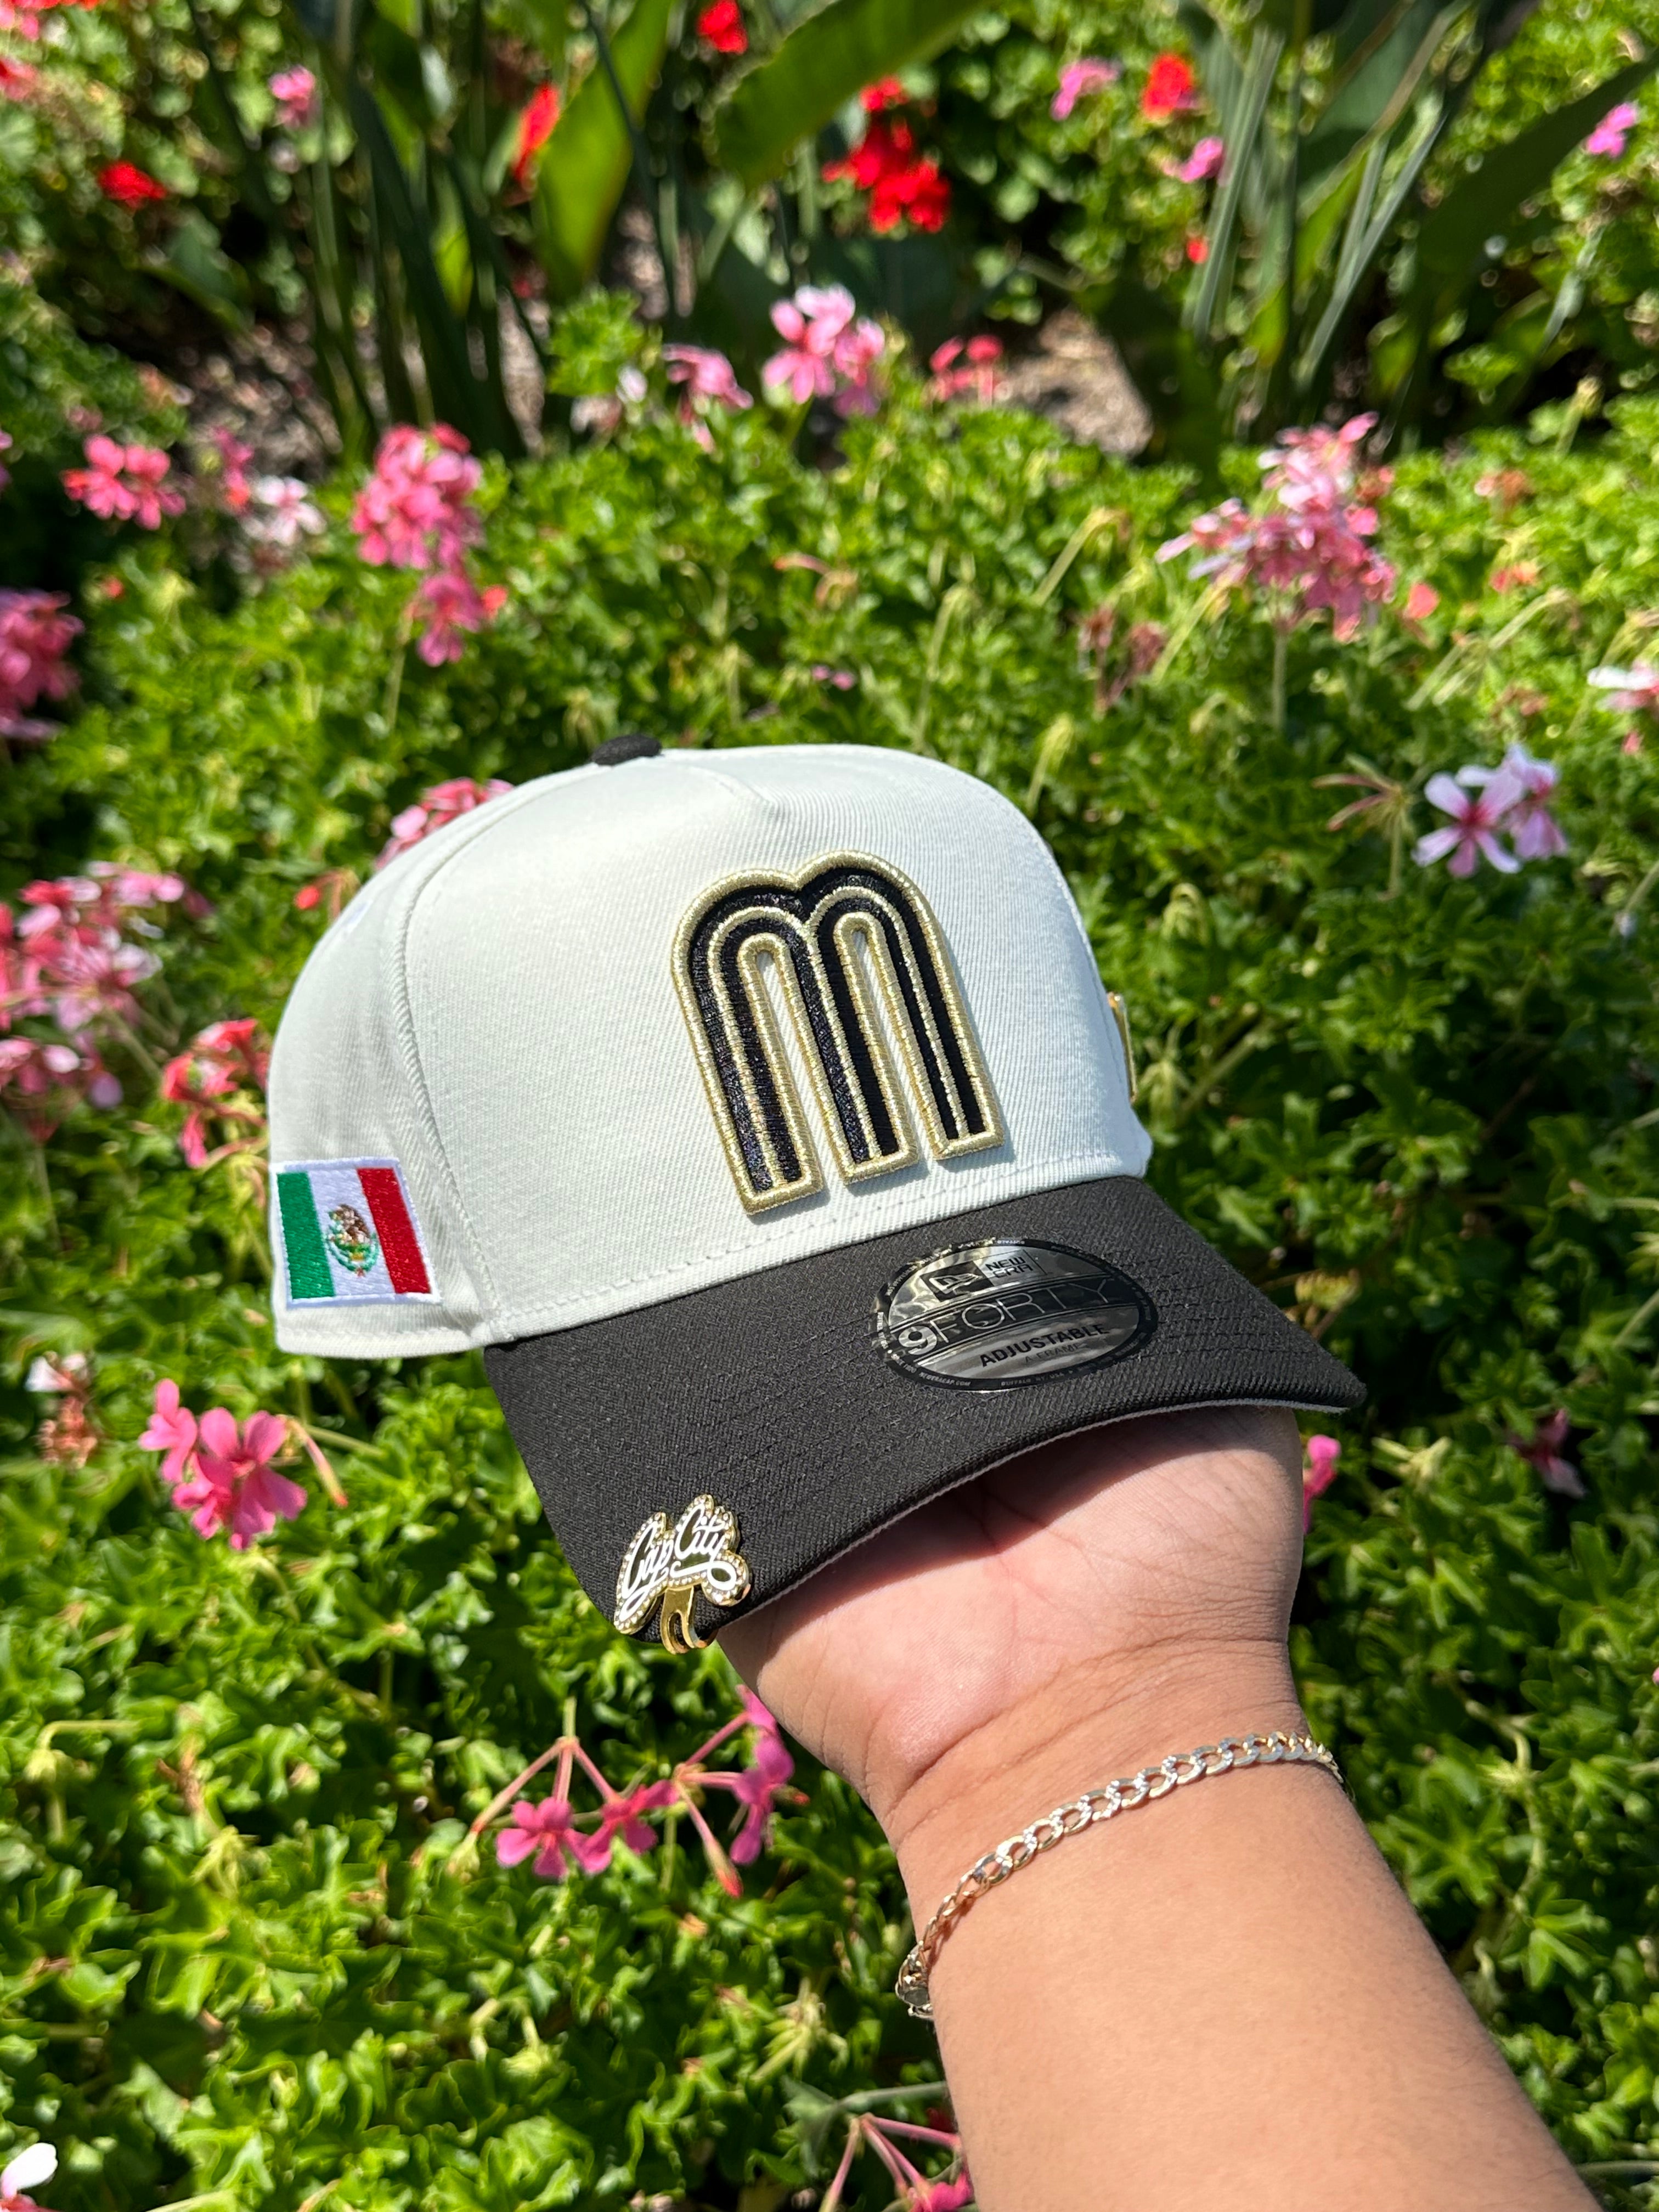 NEW ERA EXCLUSIVE 9FORTY CHROME WHITE/BLACK MEXICO A-FRAME ADJUSTABLE W/ MEXICO FLAG SIDE PATCH